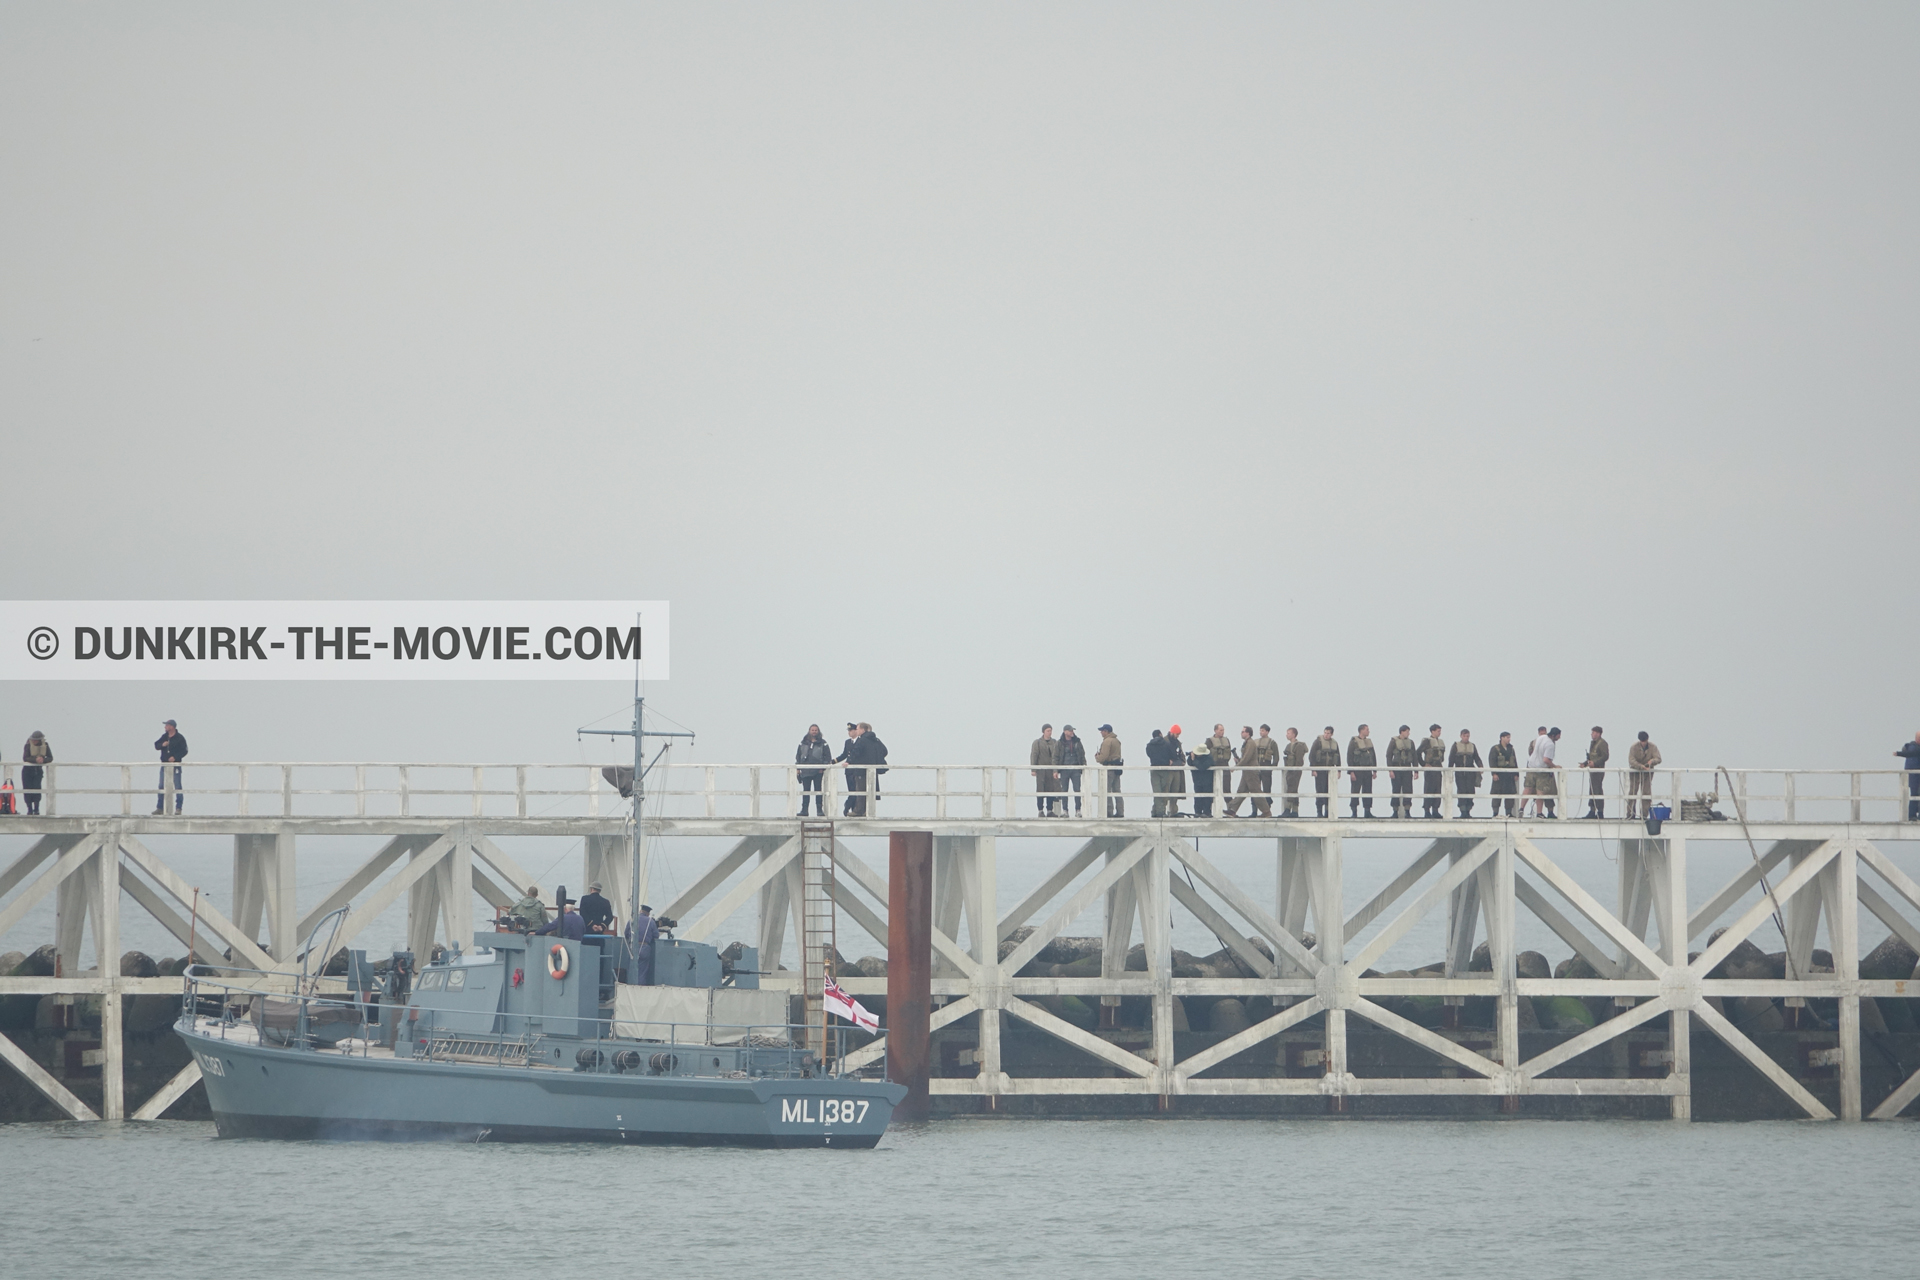 Picture with grey sky, supernumeraries, HMS Medusa - ML1387, EST pier, calm sea, technical team,  from behind the scene of the Dunkirk movie by Nolan